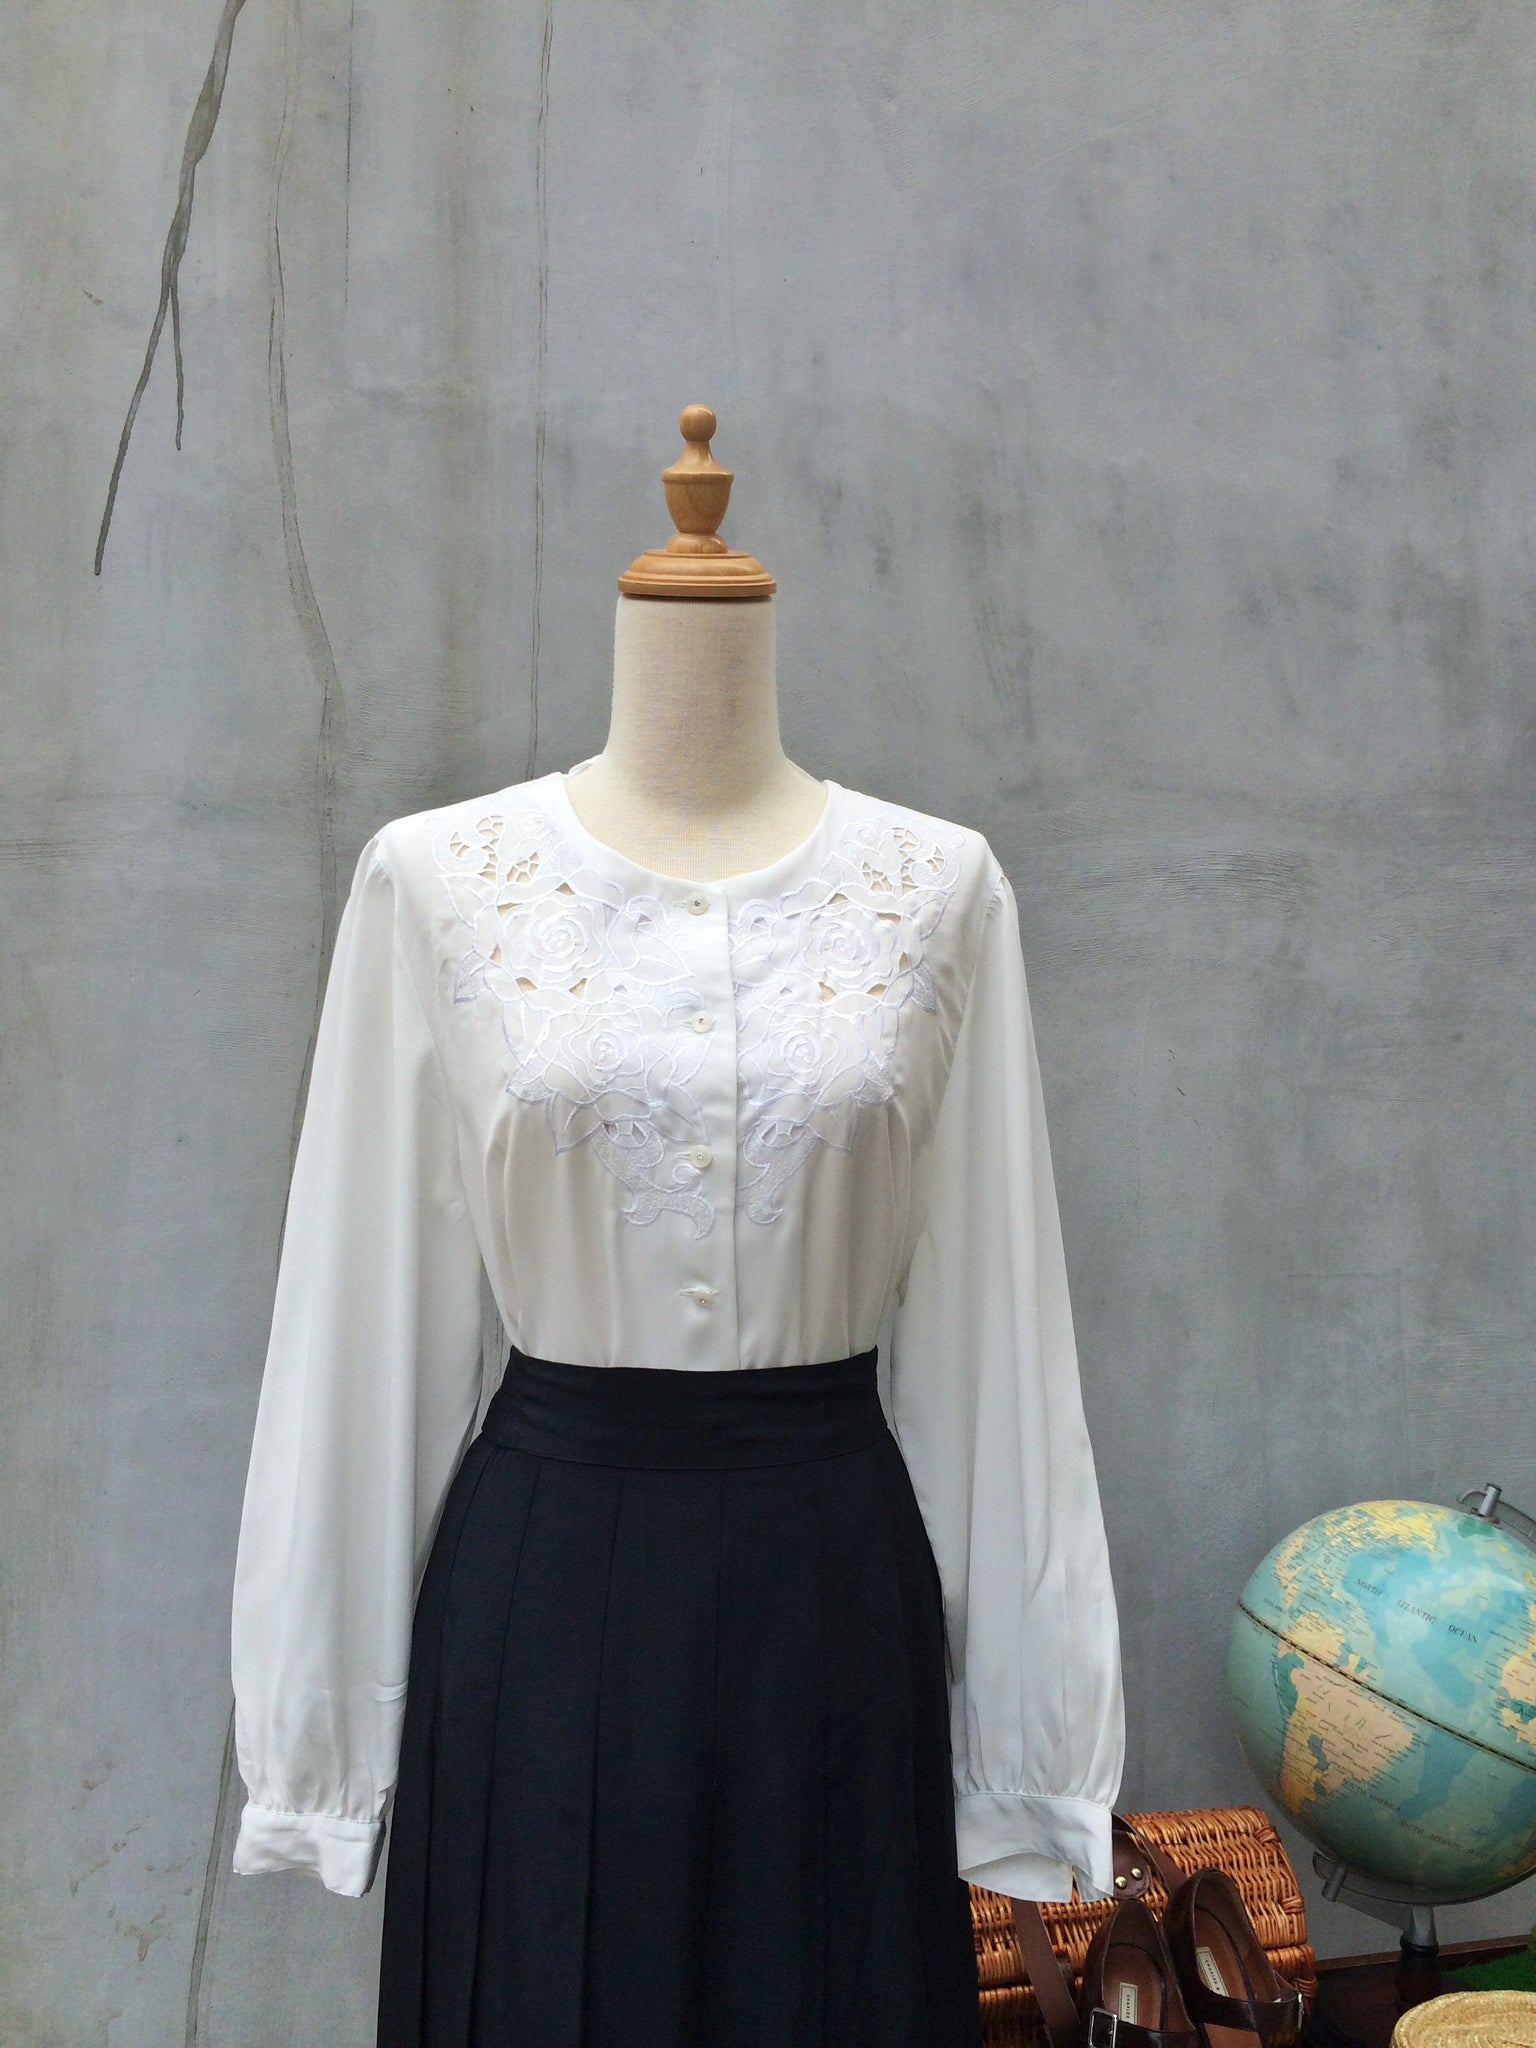 SALE ! |  Melrose | Vintage 1970s embroidered Rose cut-outs neckline White office work blouse | Soft vintage white blouse